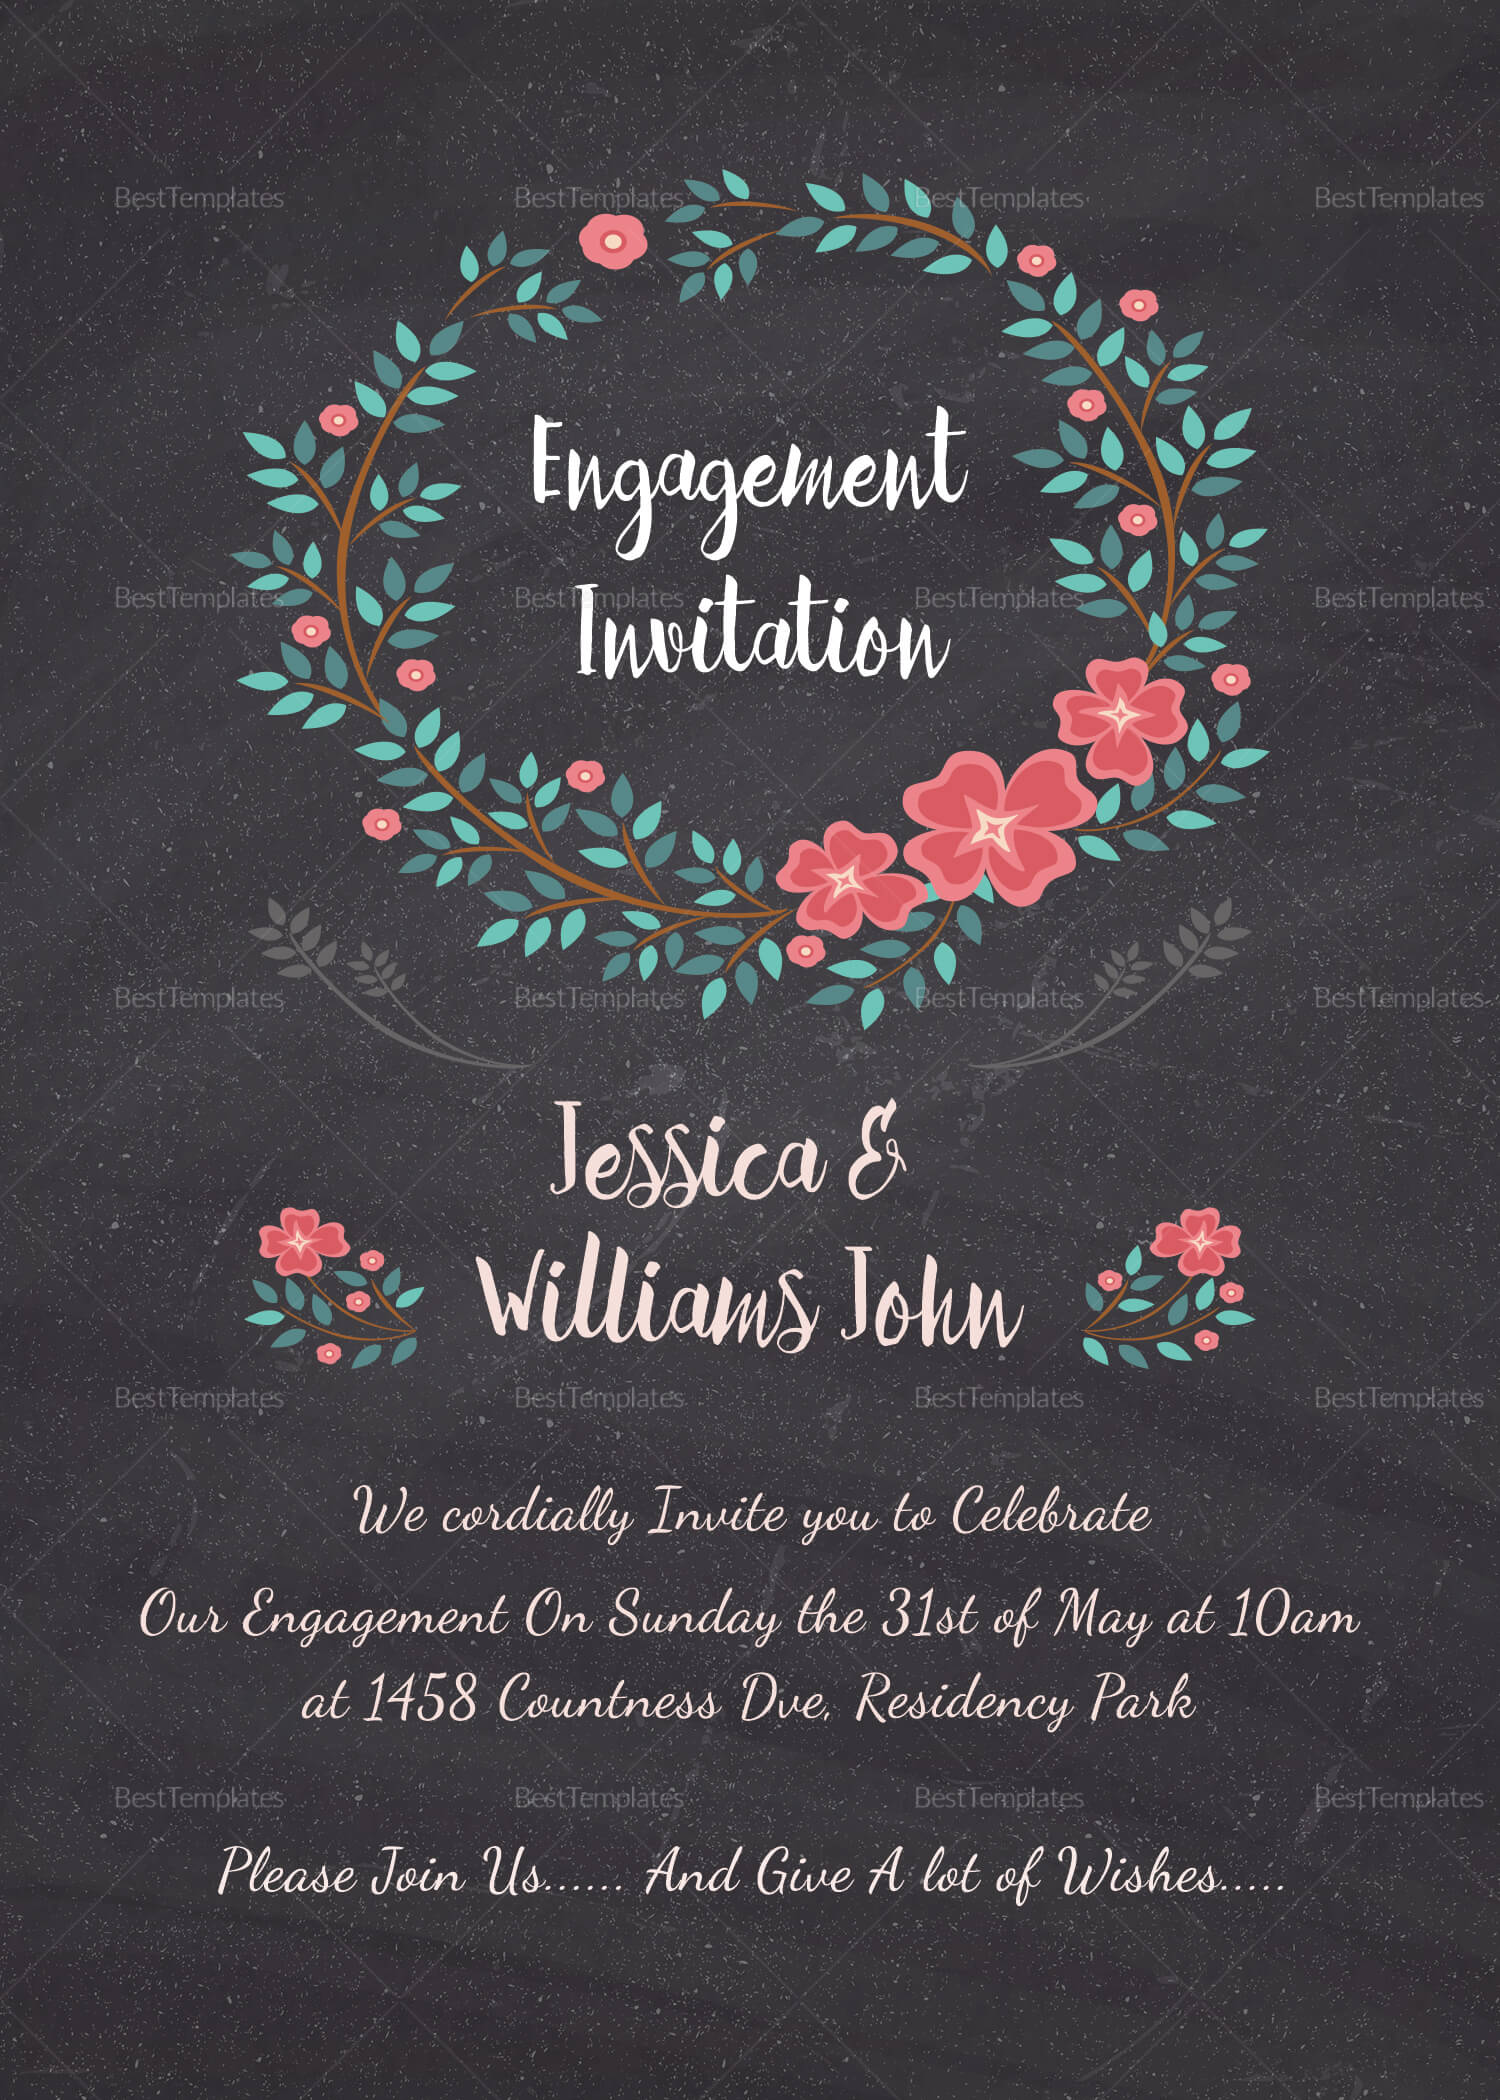 Engagement Invitation Card Template Throughout Engagement Invitation Card Template